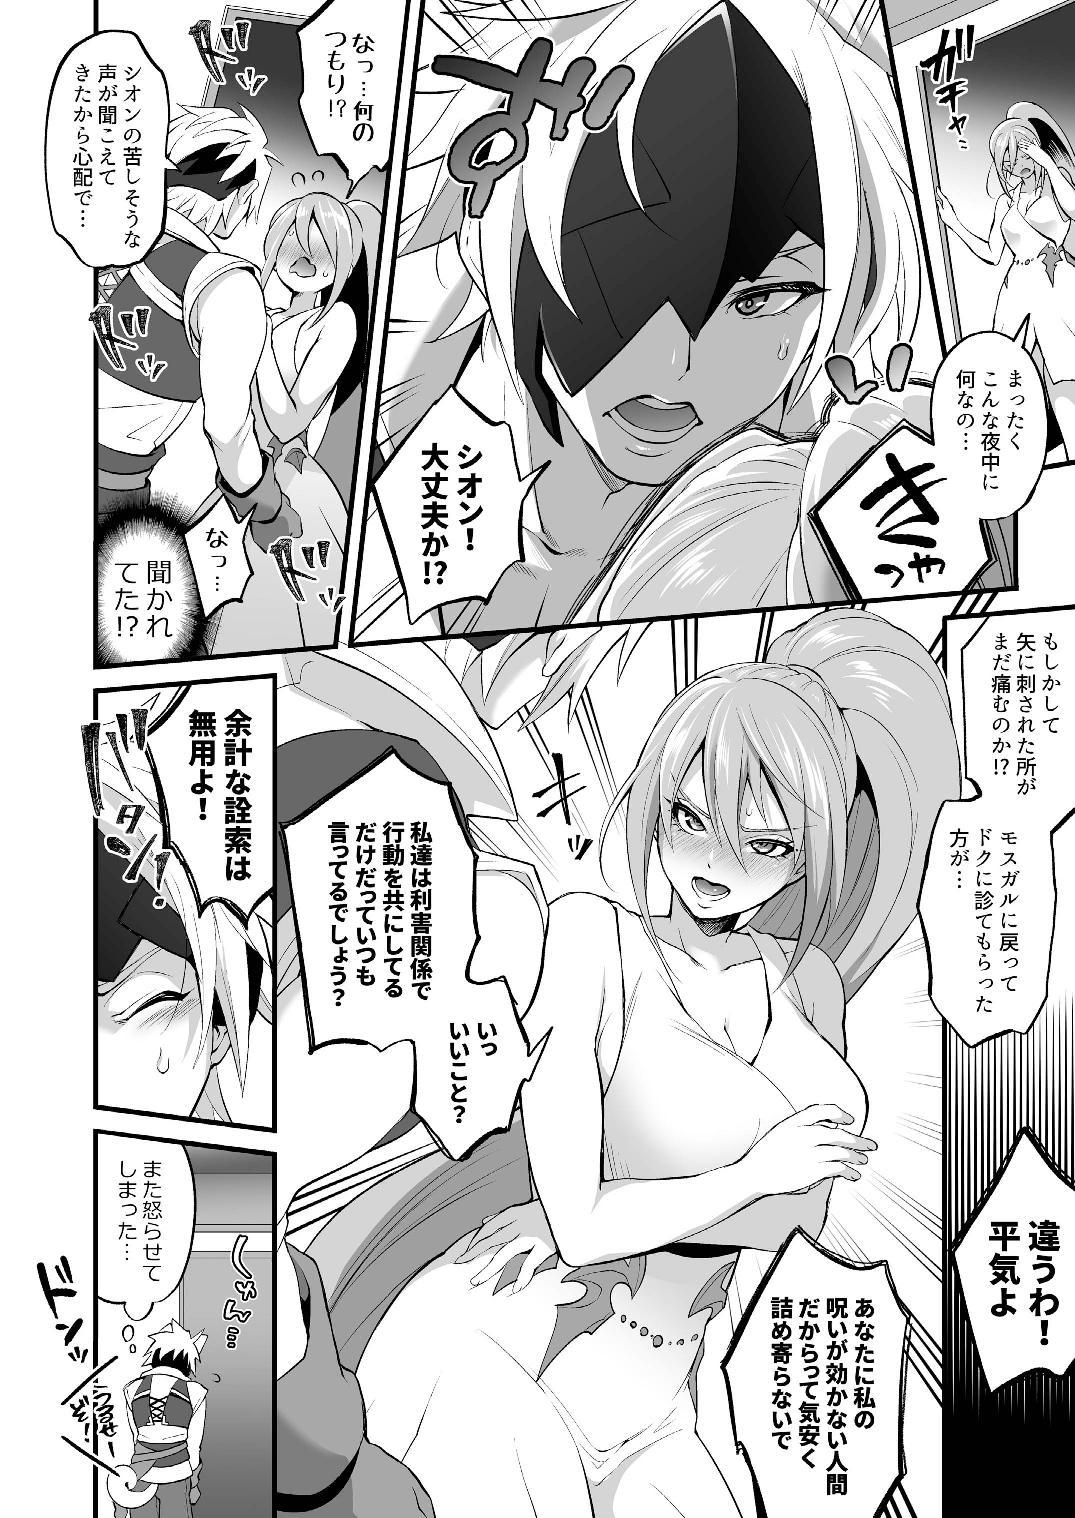 Dom 私に詰め寄ると〇〇〇がイくわよ…! - Tales of arise Analsex - Page 8